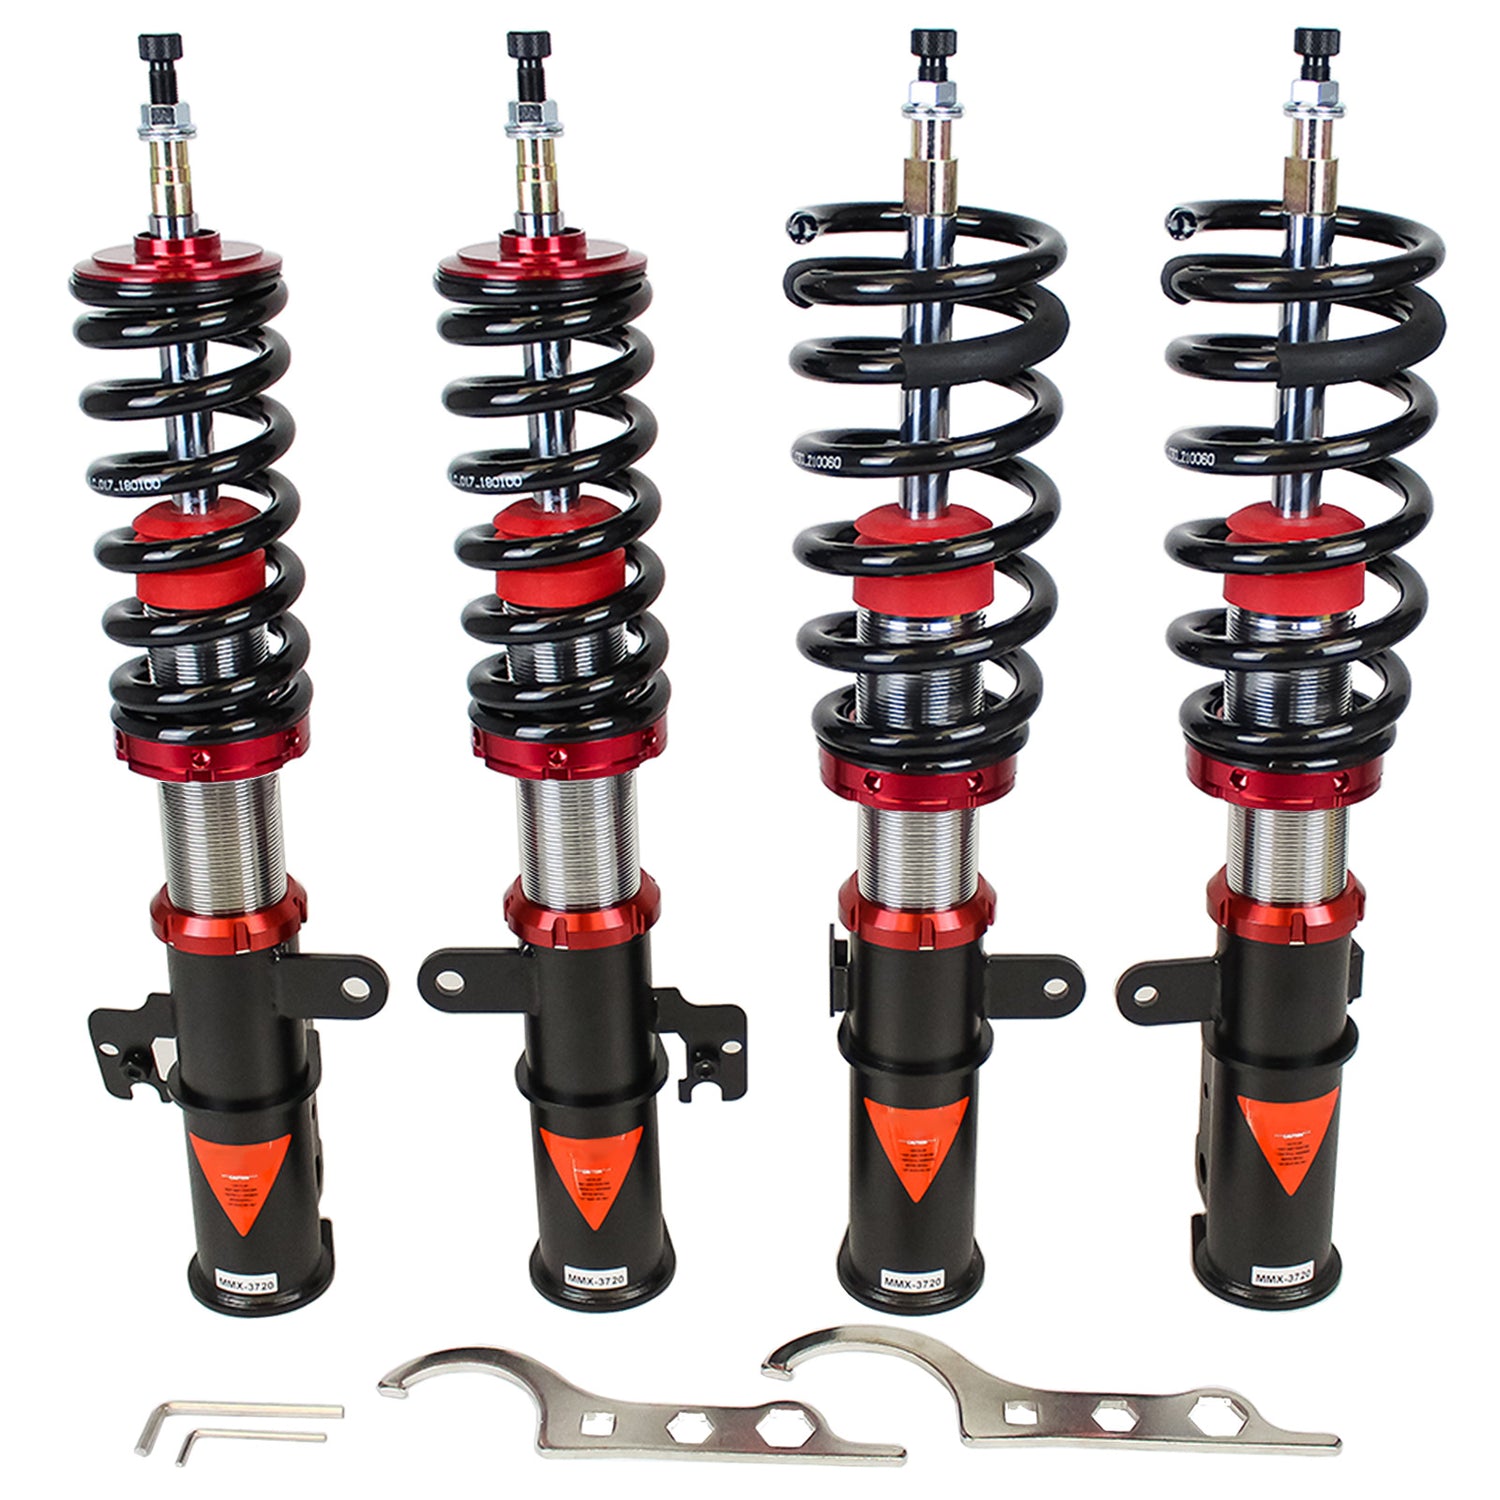 MMX3720 MAXX Coilovers Lowering Kit, Fully Adjustable, Ride Height, 40 Clicks Rebound Settings, Lexus RX330/RX350(XU30) 04-09(2WD)